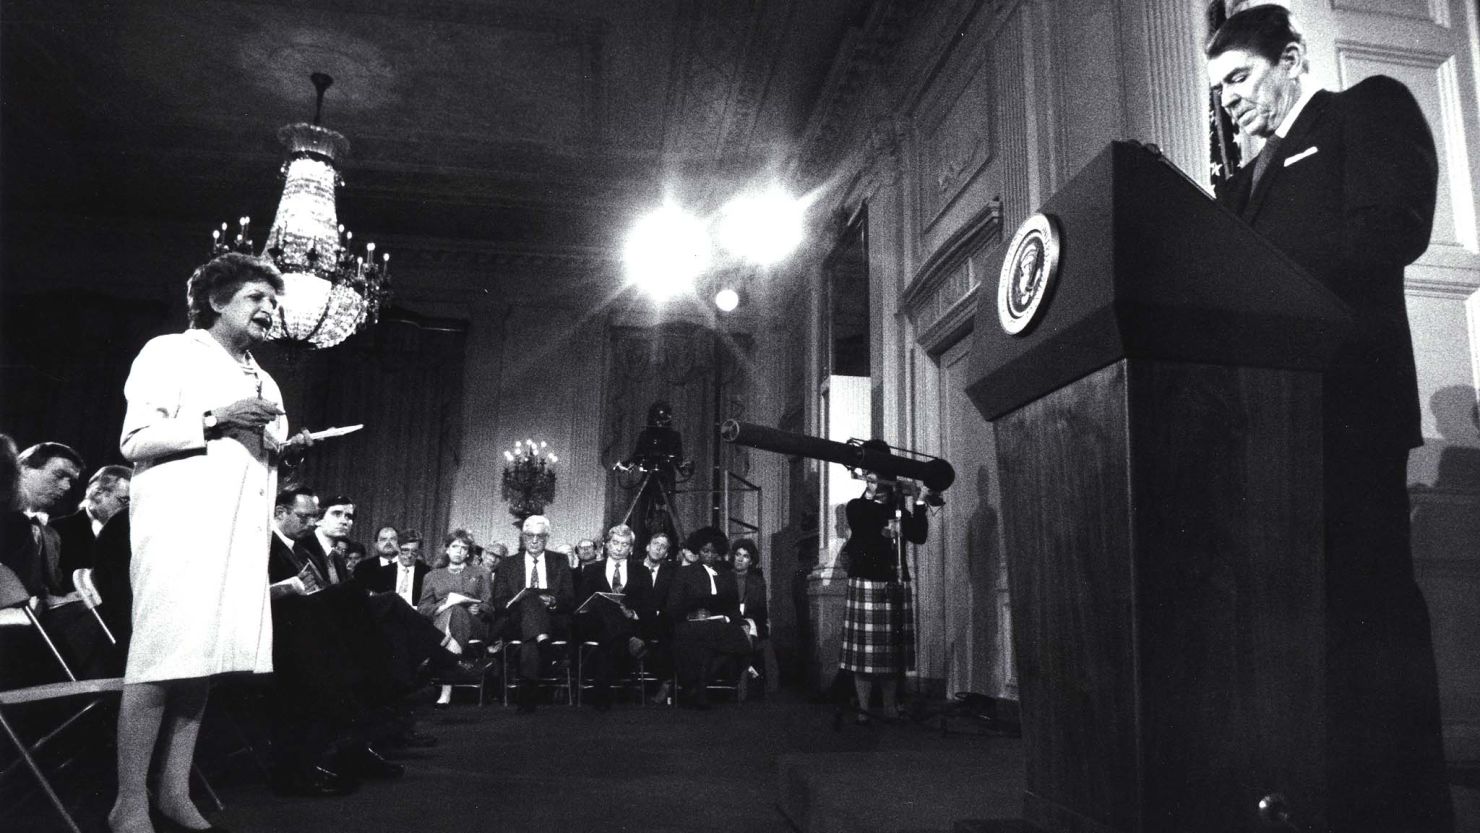 Reporter Helen Thomas questions then-President Ronald Reagan during a press conference at the White House in March 1987.